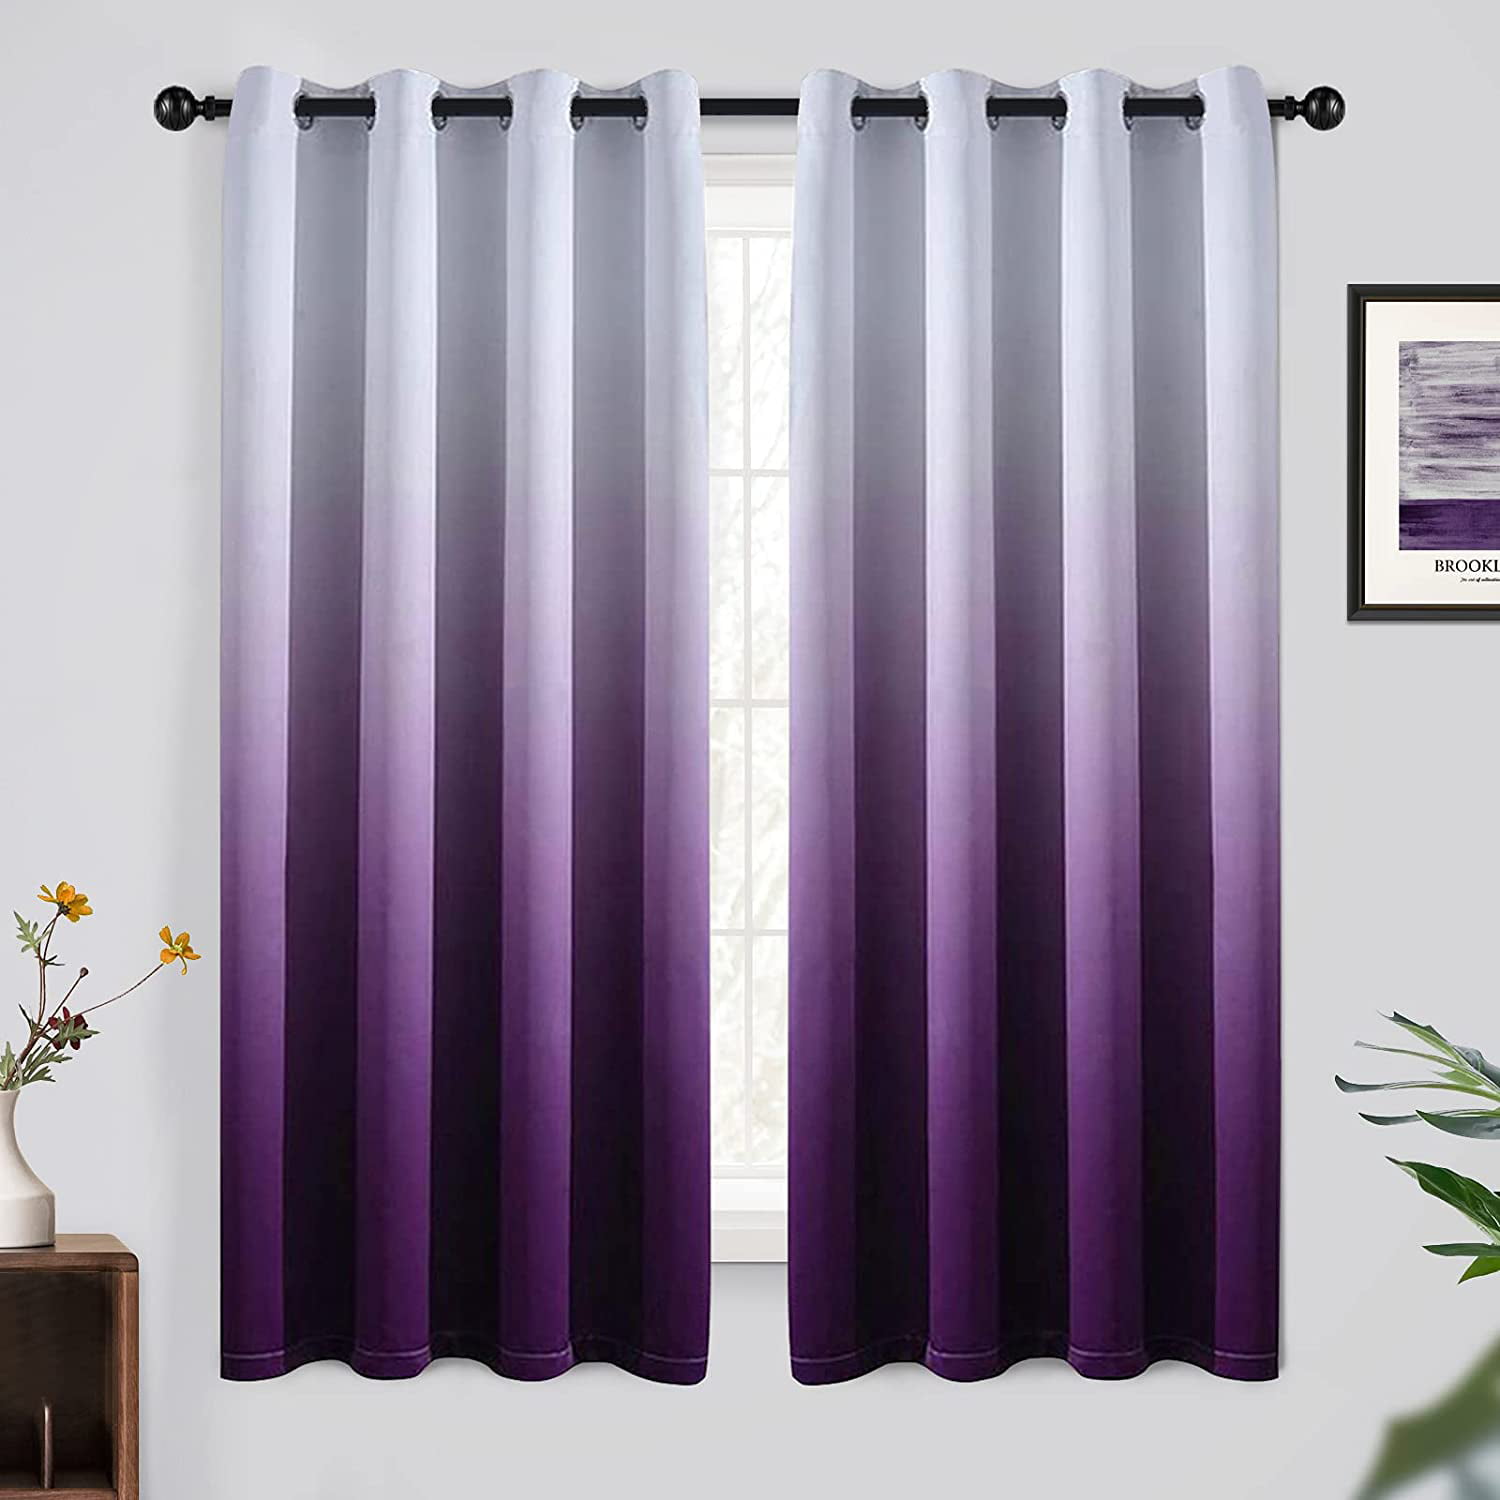 W 46 inch x L 54 inch Purple 2 Panels PONY DANCE Purple Curtains Blackout- Short Rings Top Thermal Curtains for Home Decor Light Blocked Wind Proof Window Treatment for Bedroom